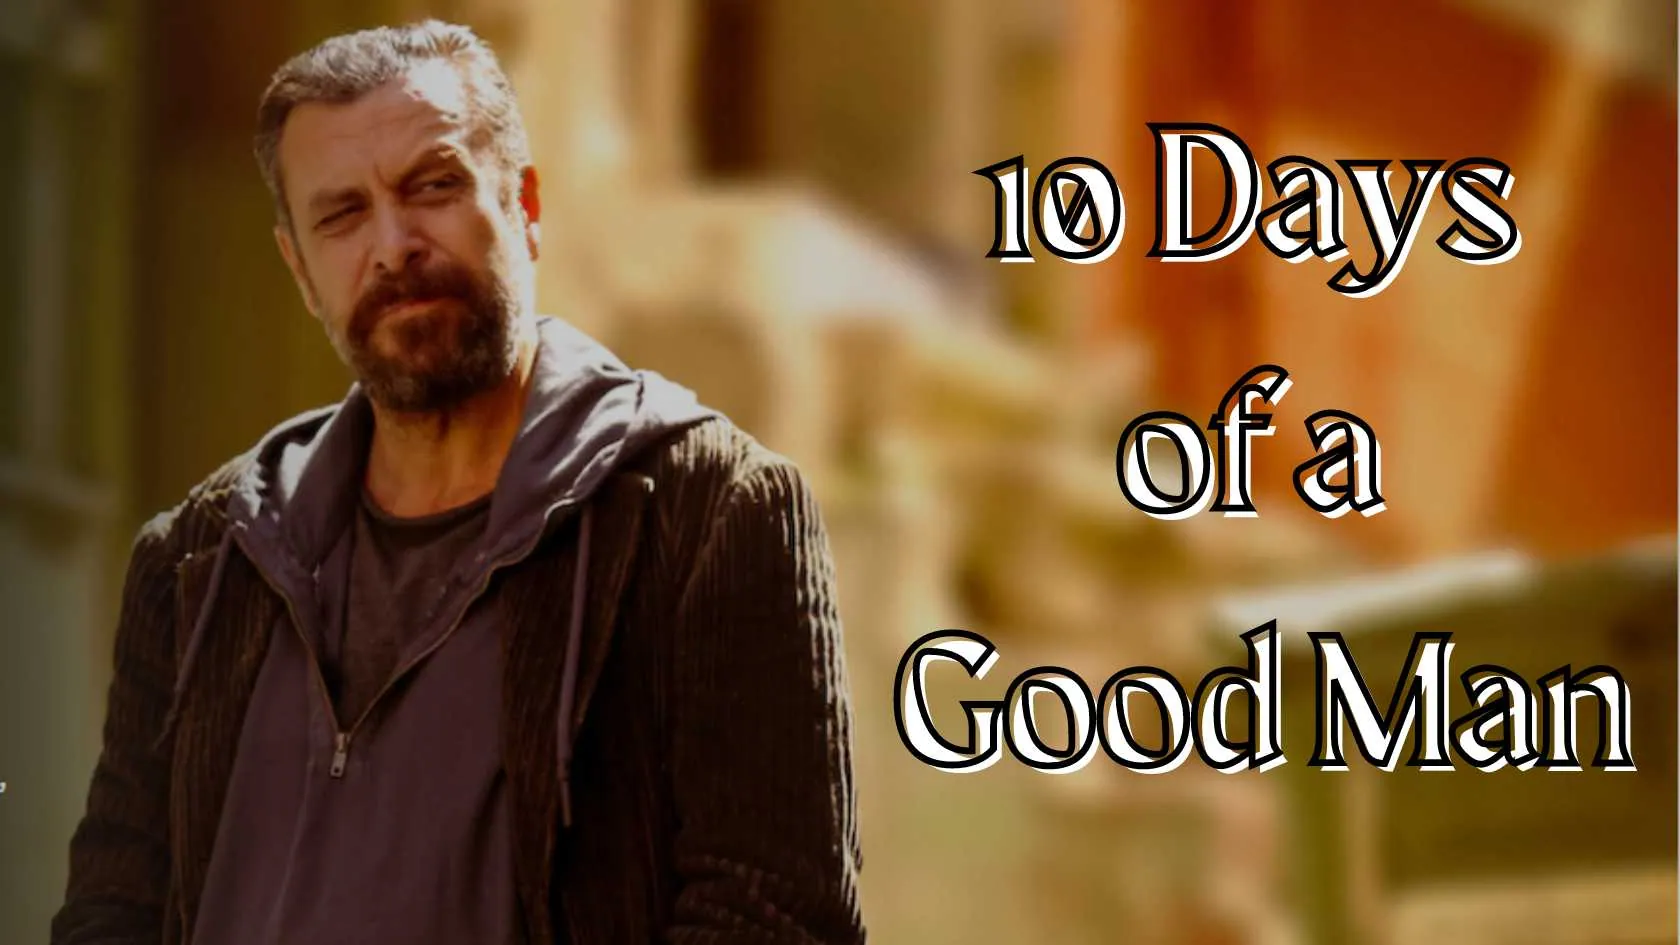 10 Days of a Good Man Parents Guide